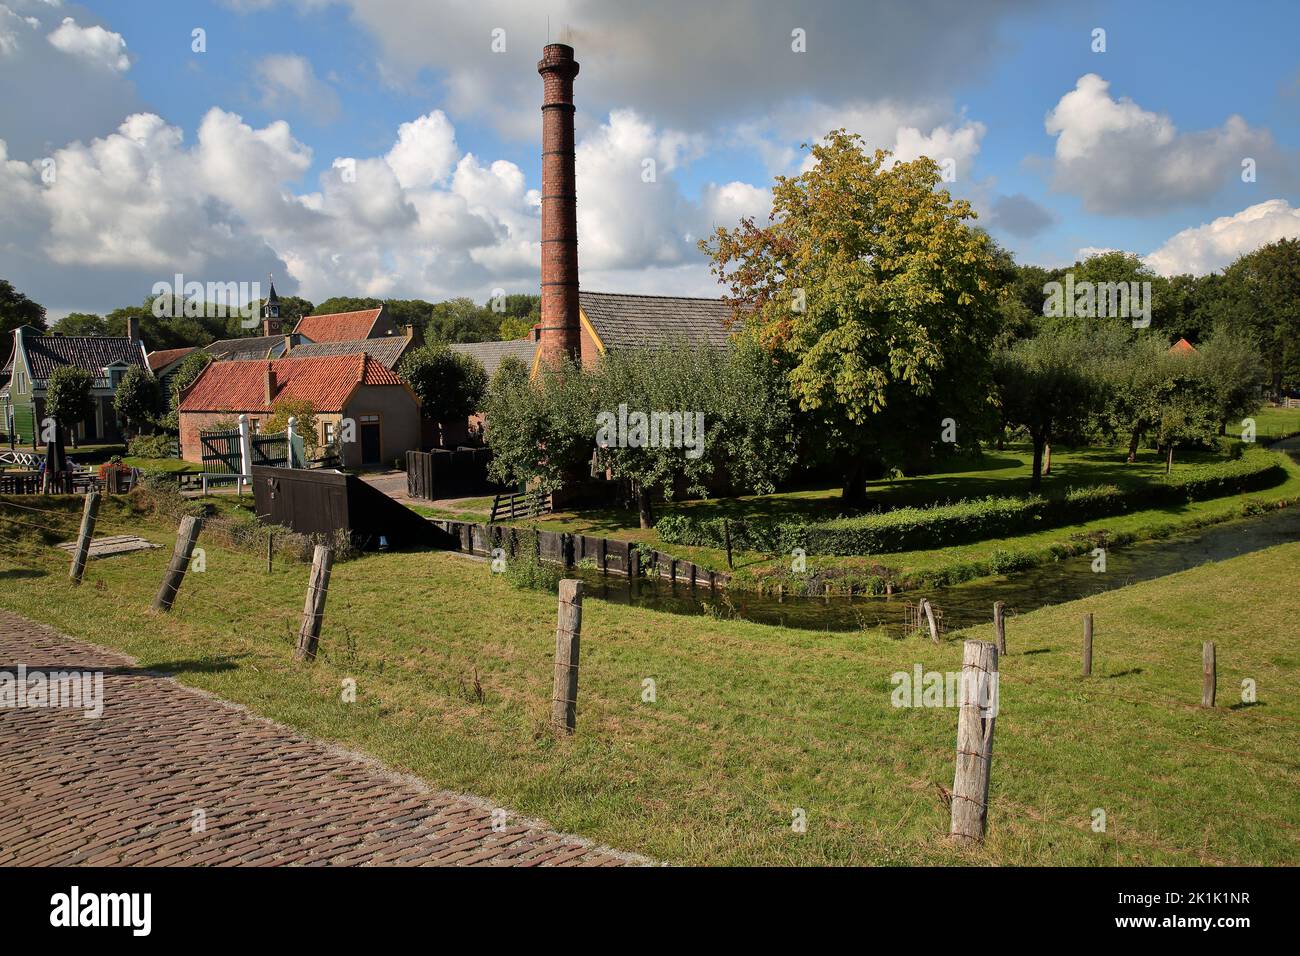 ENKHUIZEN, NETHERLANDS - SEPTEMBER 11, 2022: Zuiderzeemuseum, an open air museum on the shore of Ijsselmeer, with traditional cottages and a chimney Stock Photo